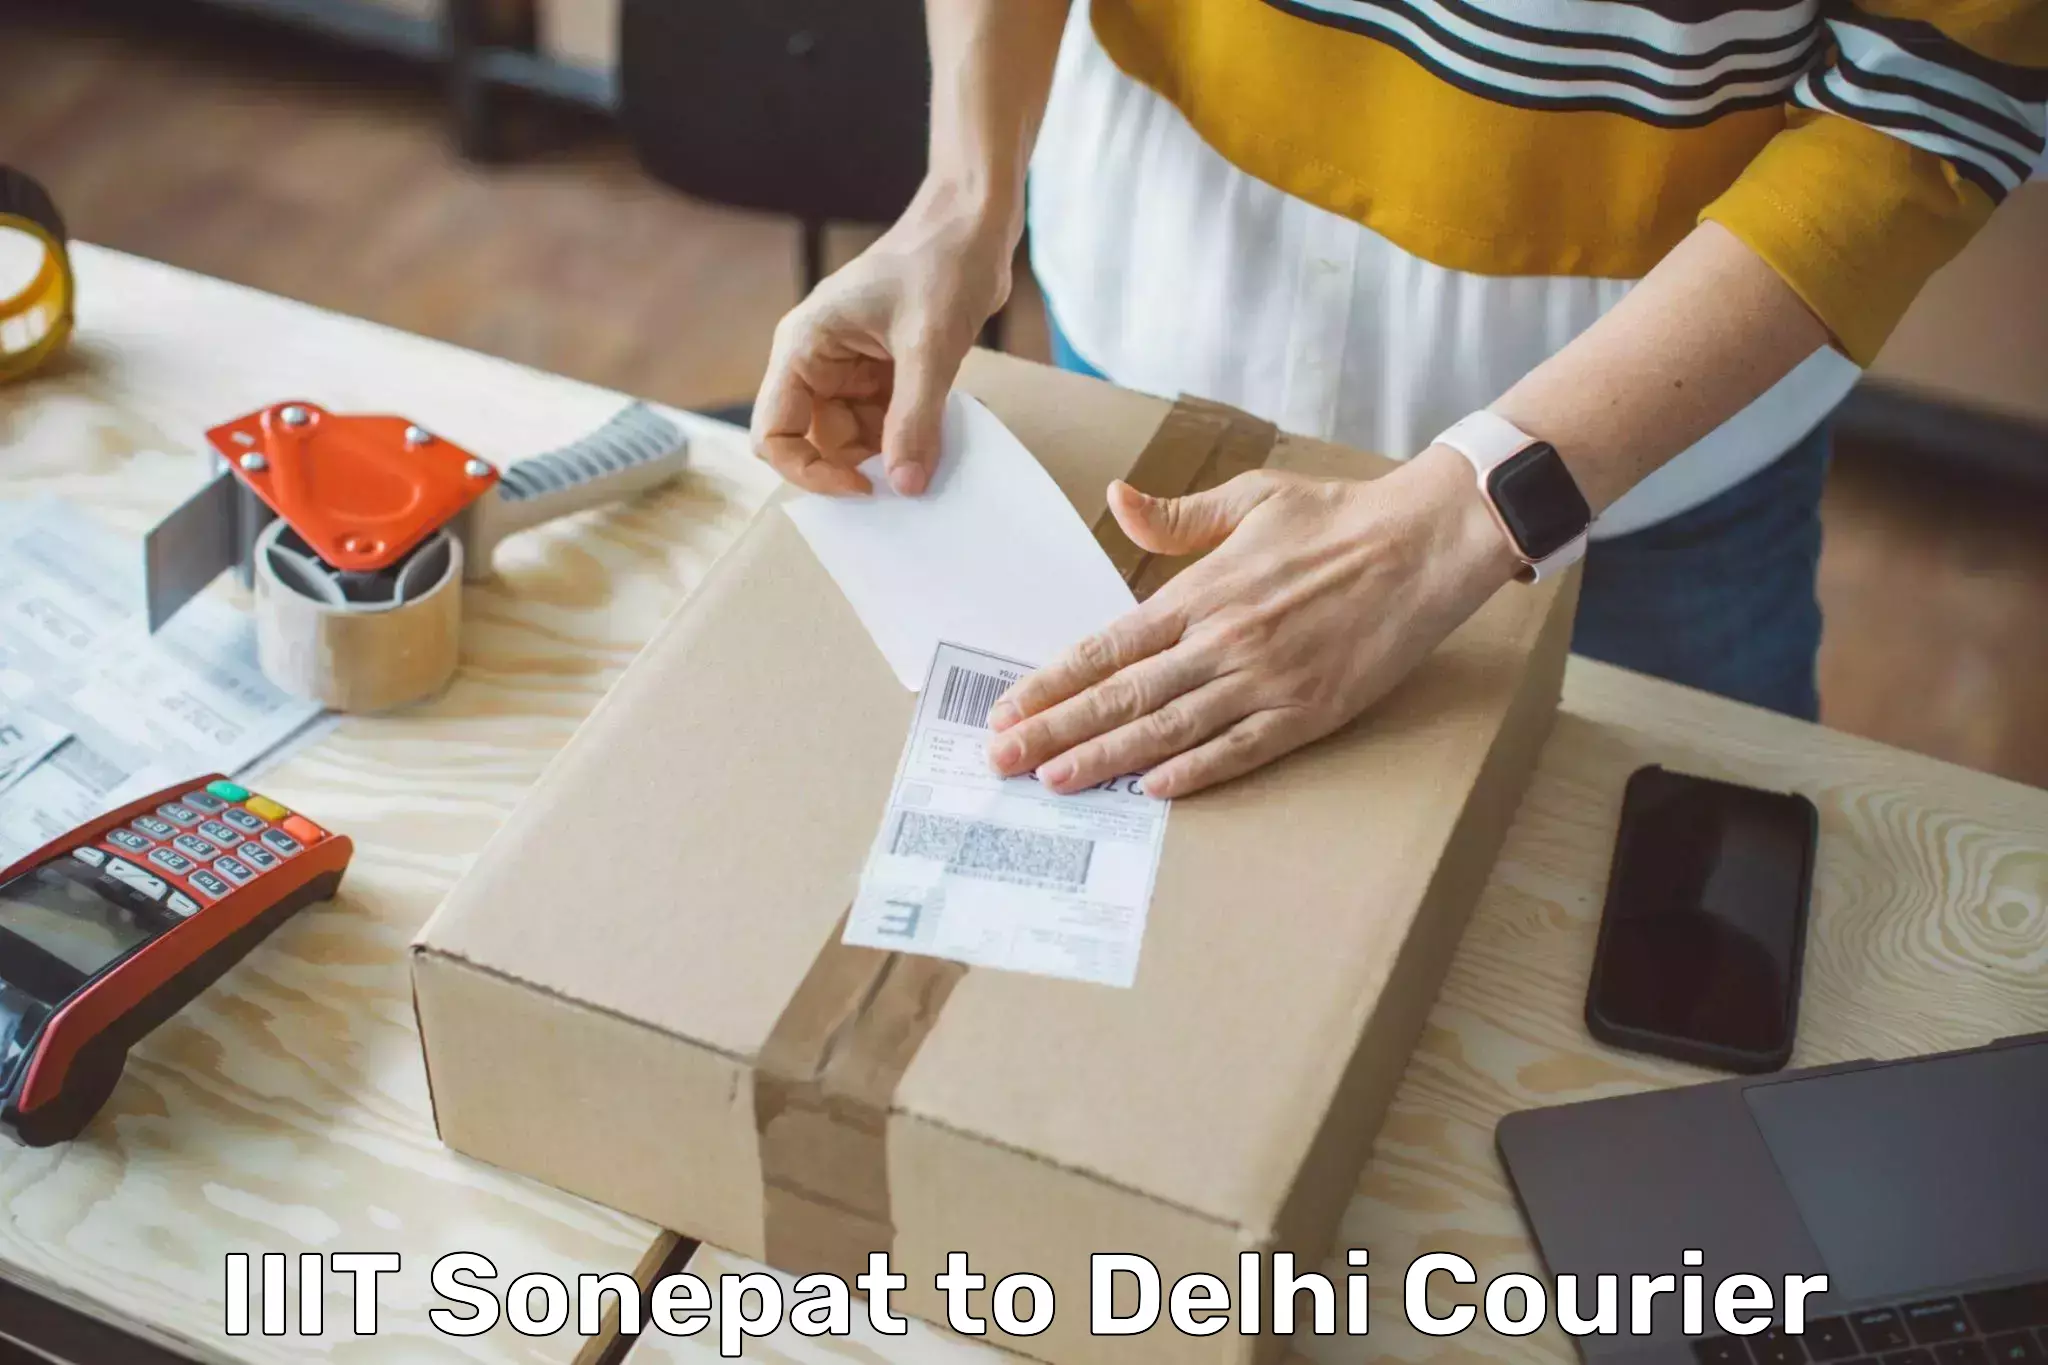 State-of-the-art courier technology IIIT Sonepat to Delhi